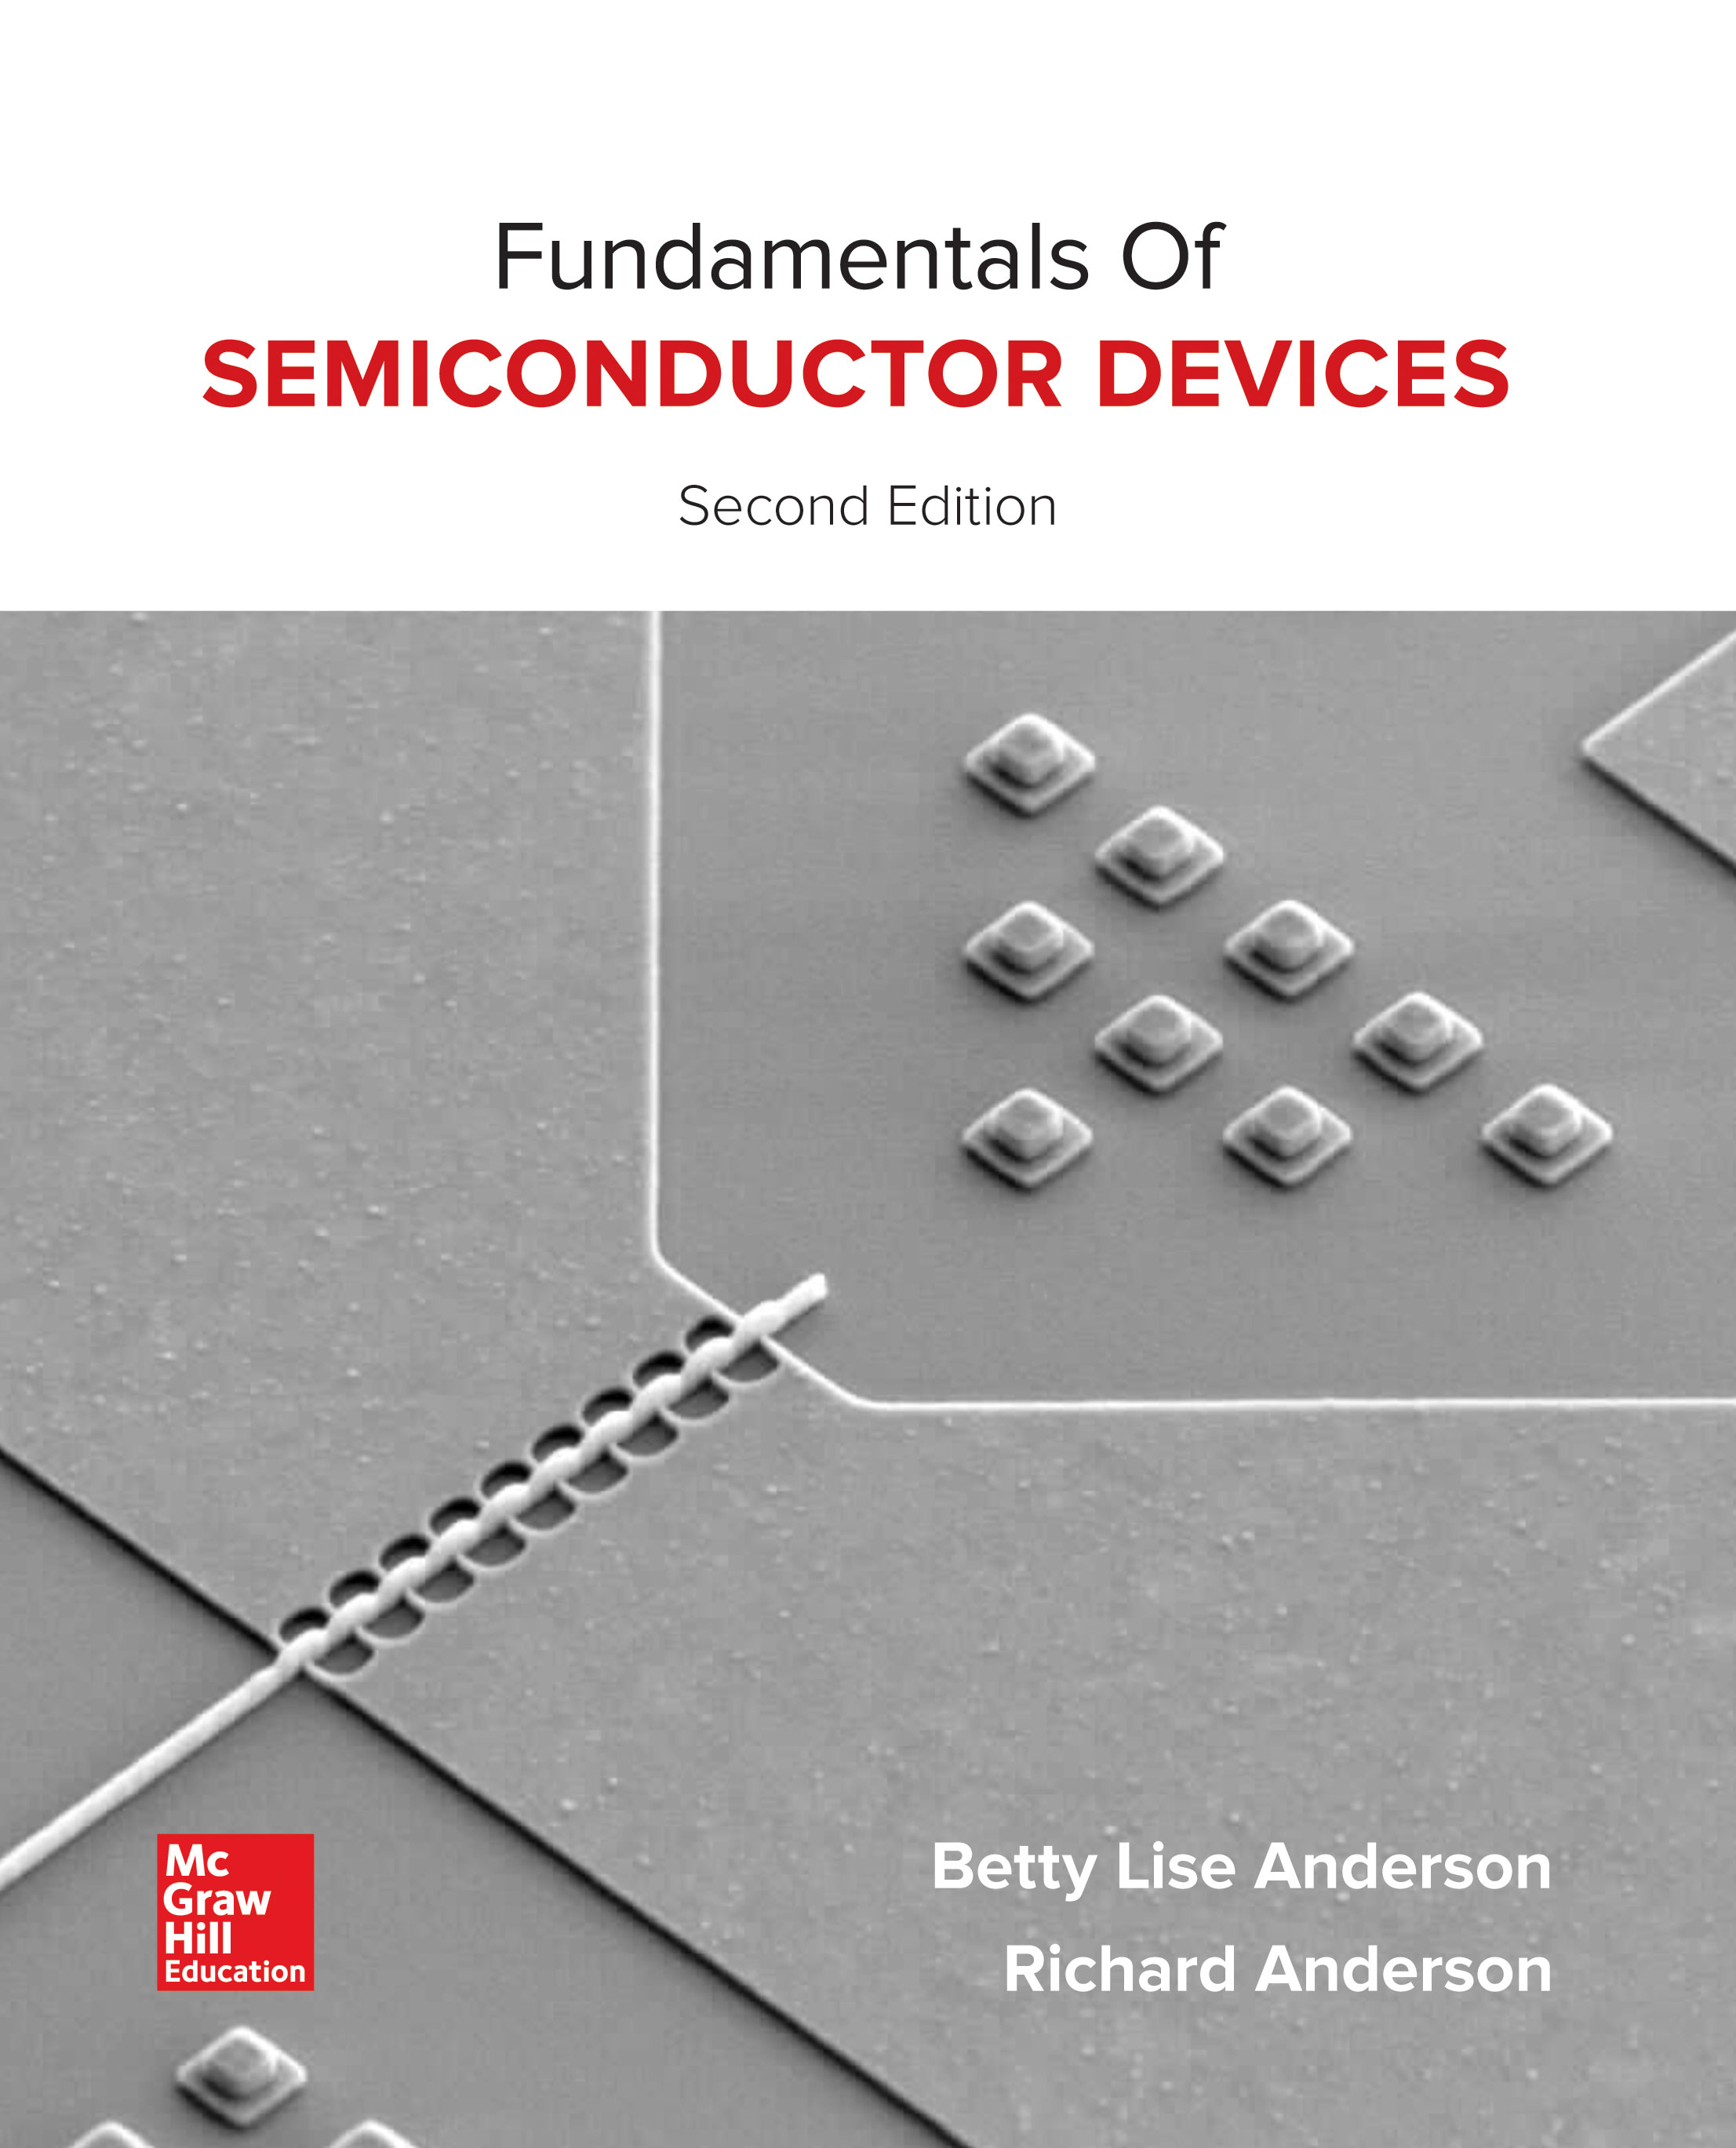 Fundamentals of Semiconductor Devices 2nd Ed. book cover